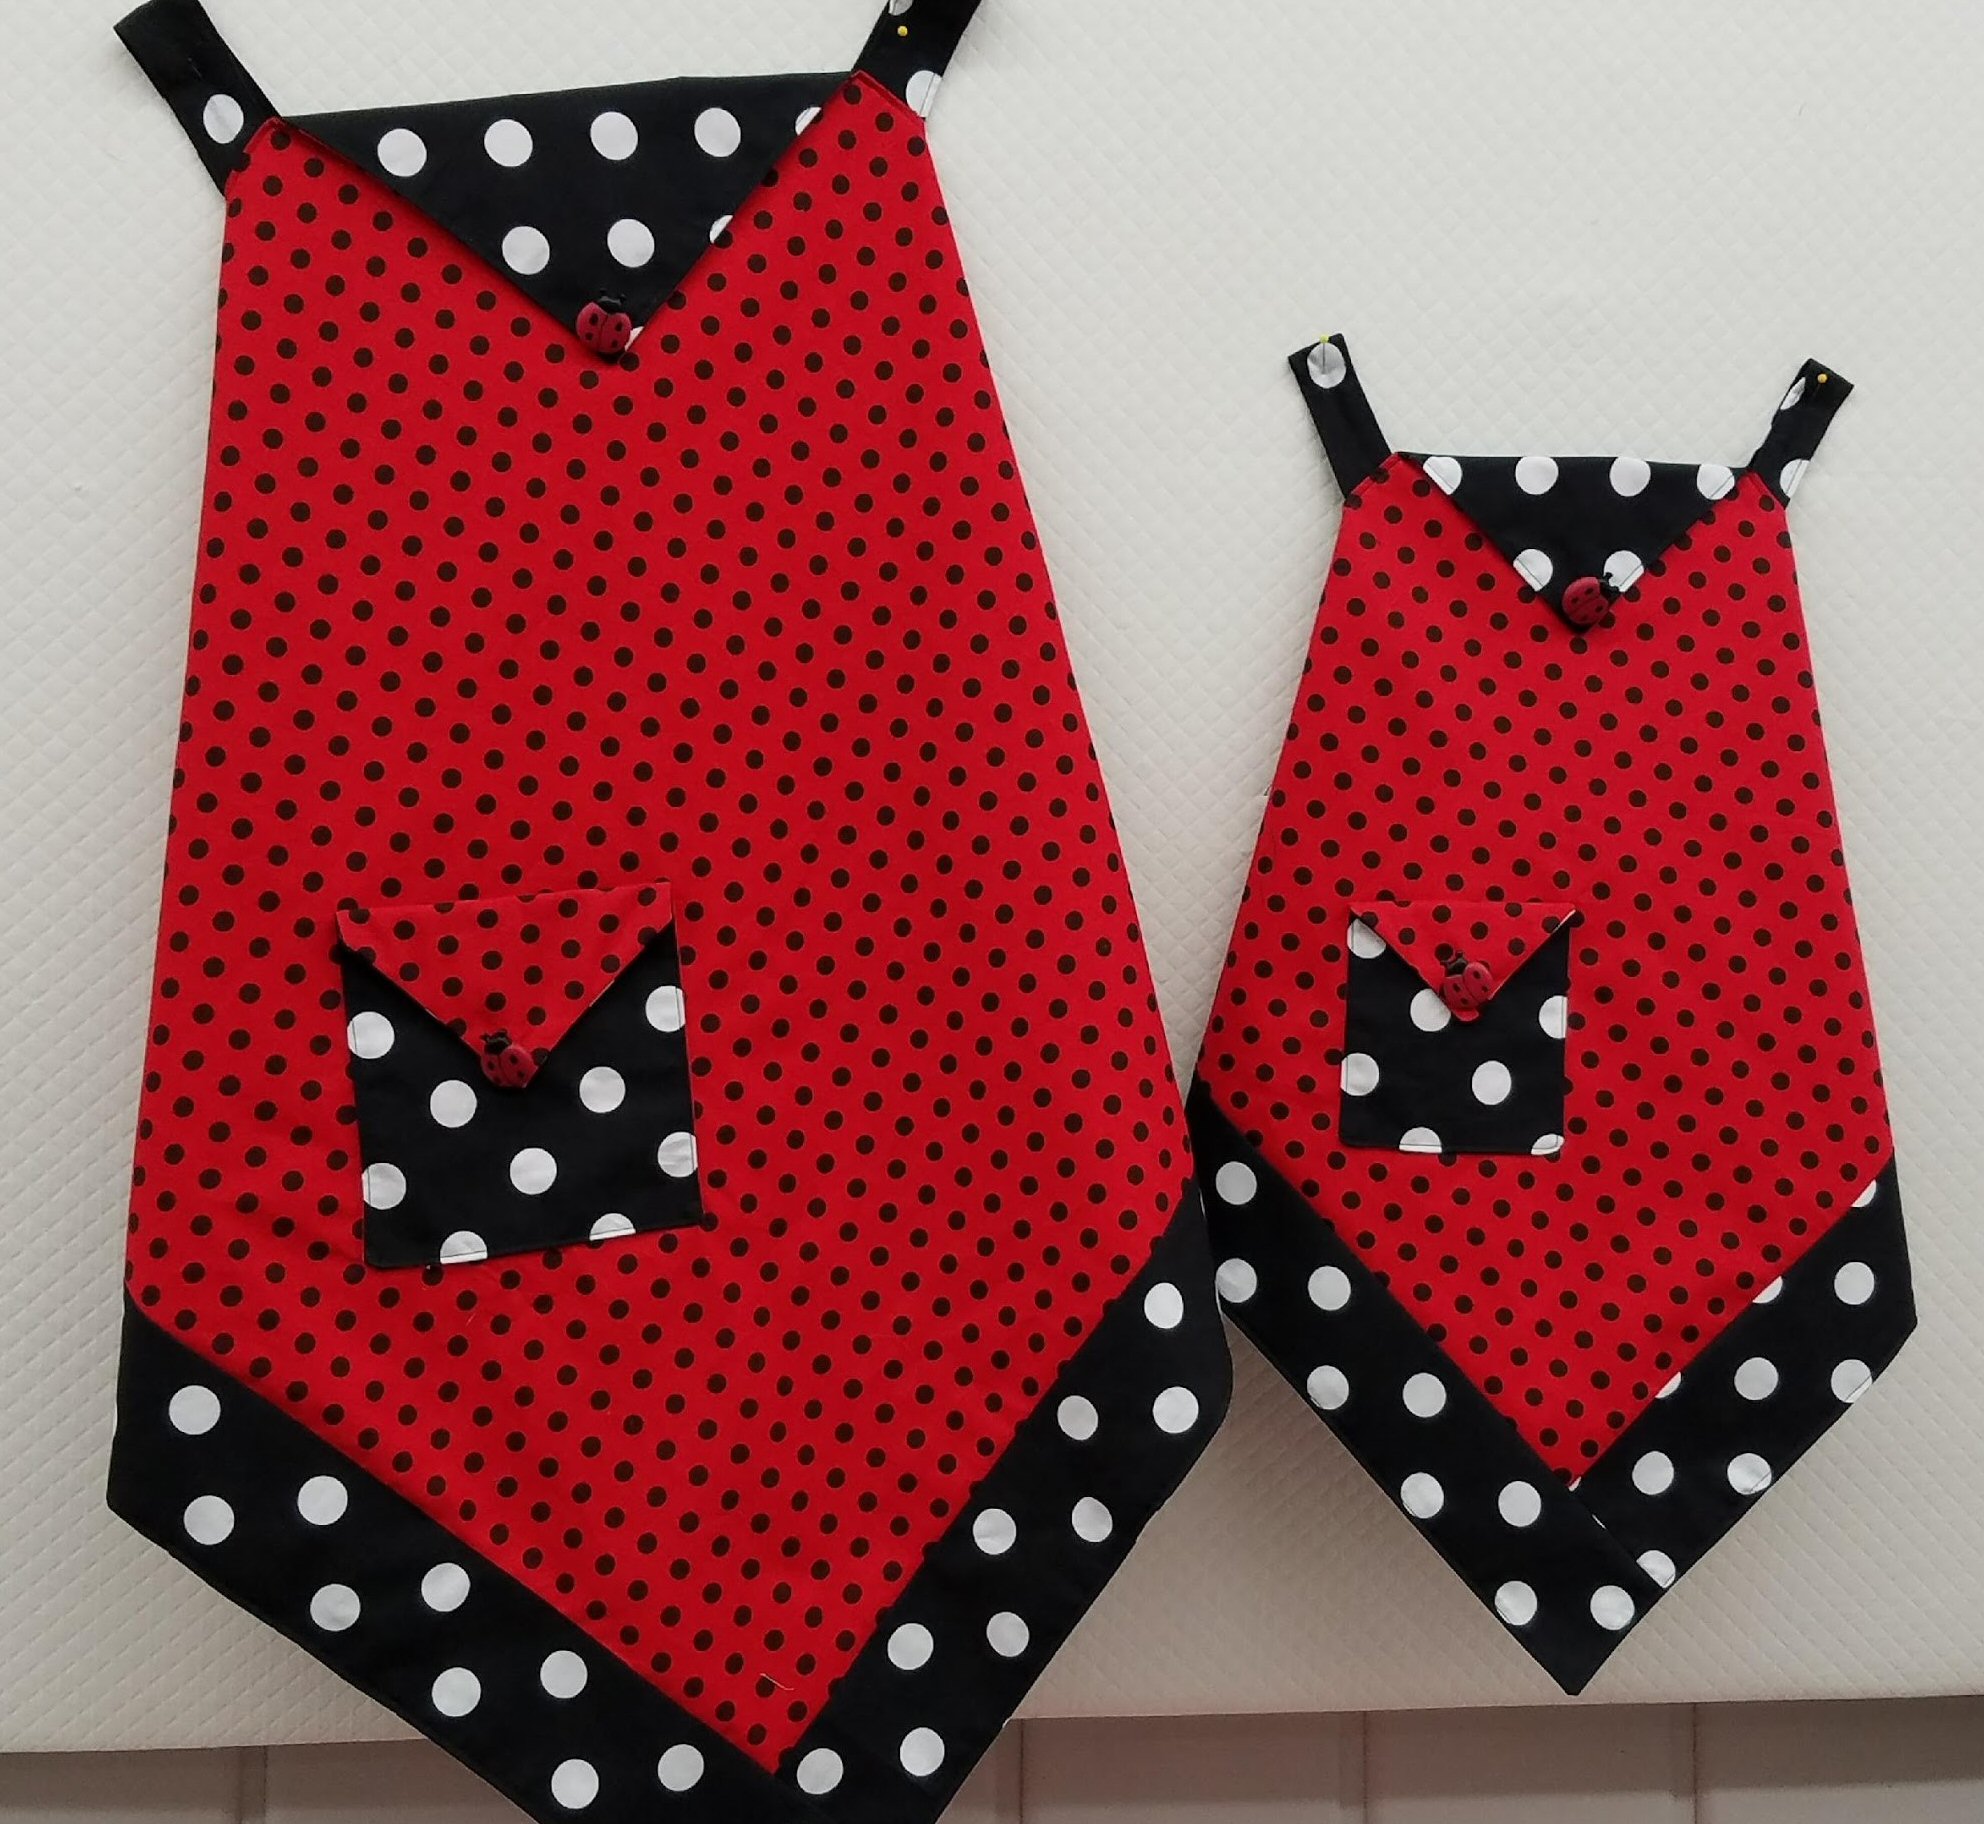 MOTHER DAUGHTER APRONS-Intermediate Sewing Level 1